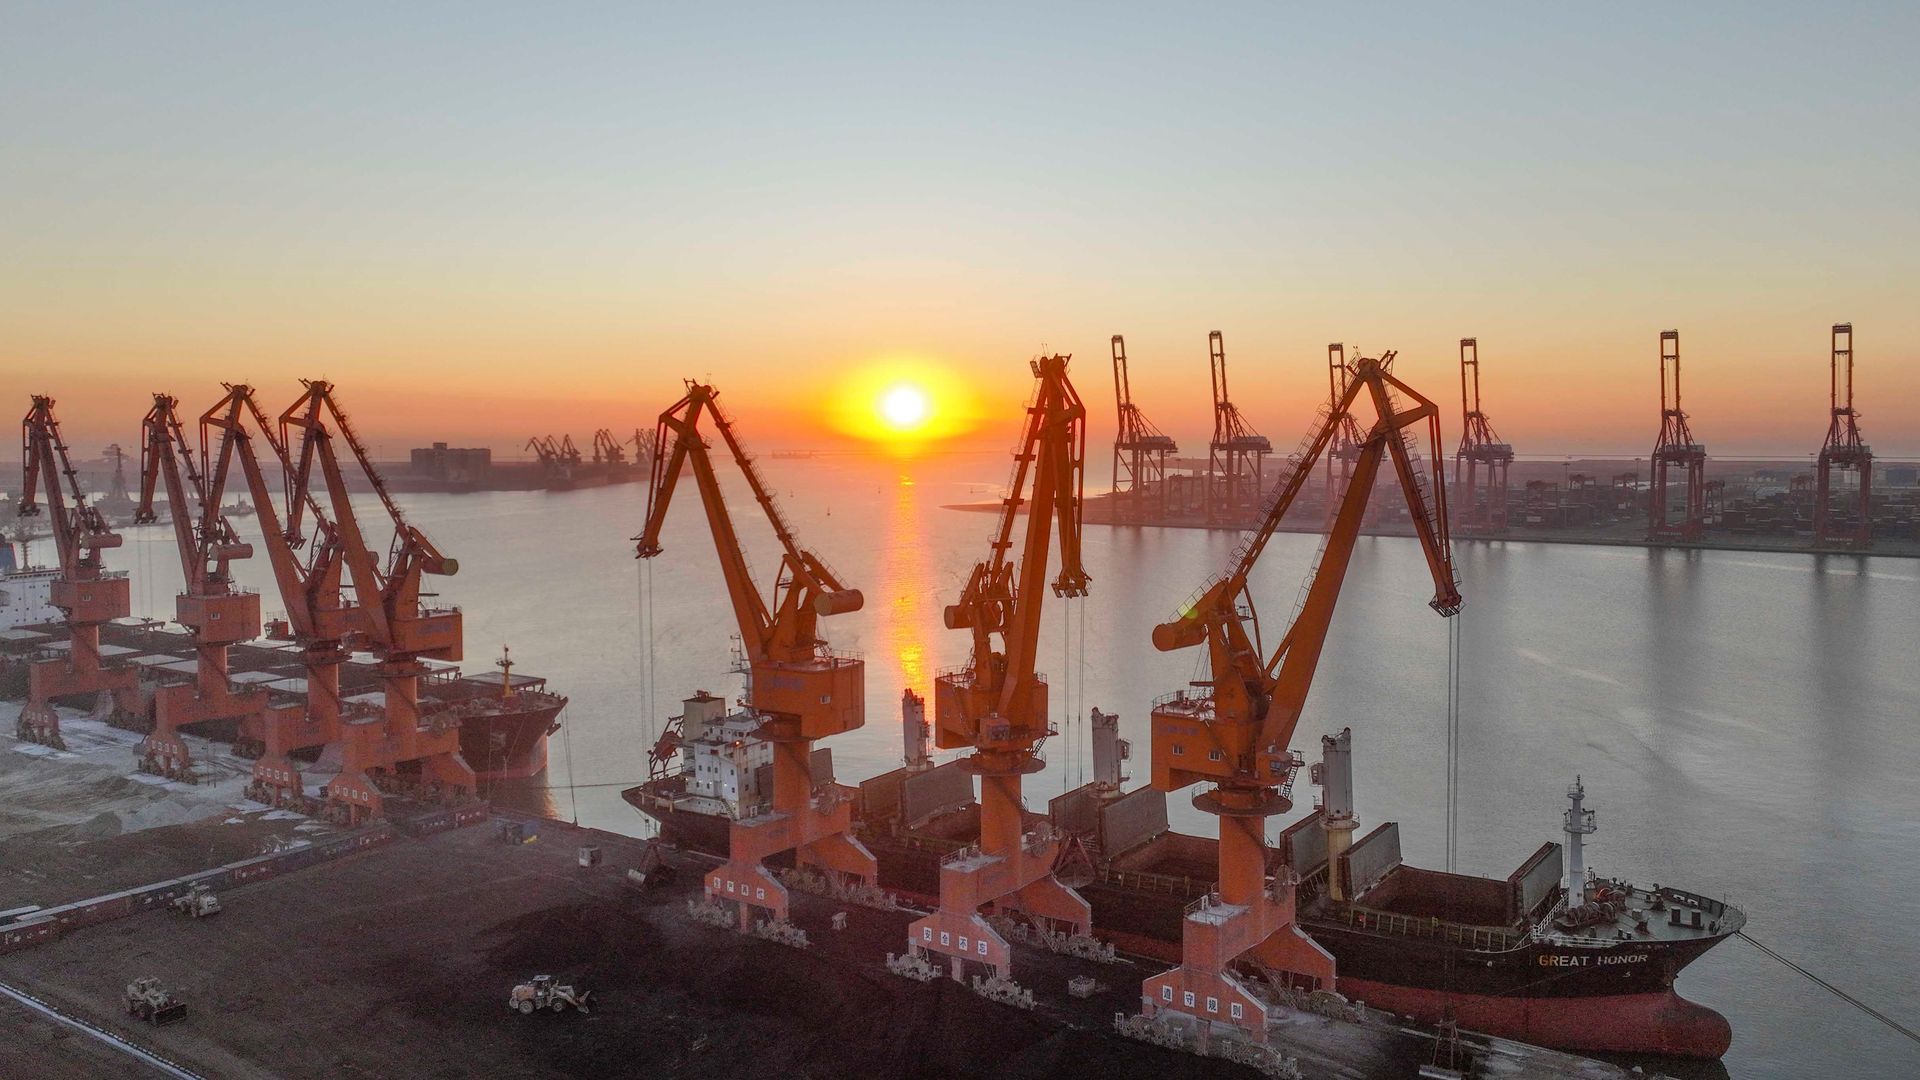 Sun setting over Chinese port